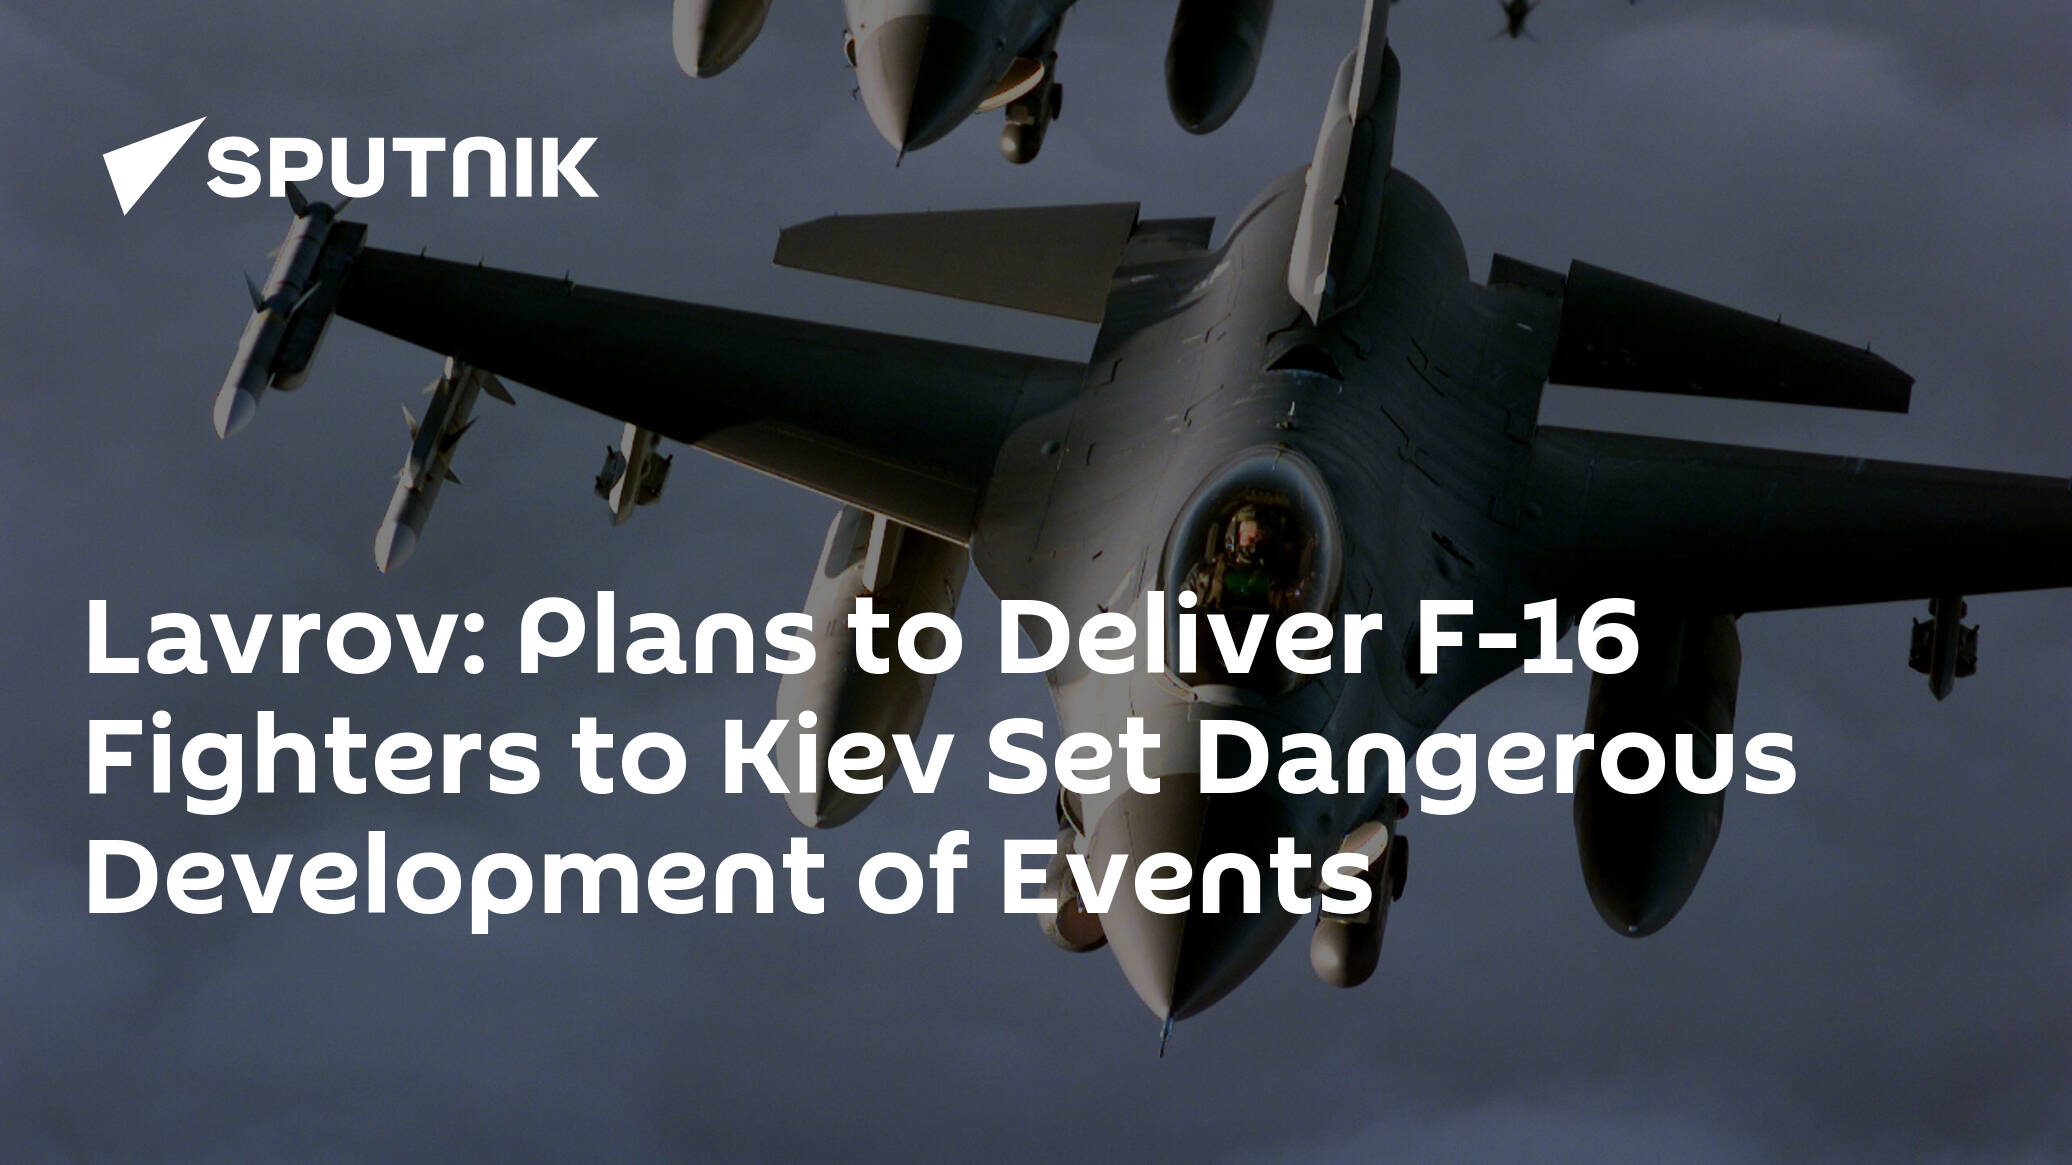 Lavrov: Plans to Deliver F-16 Fighters to Kiev Sets Dangerous Development of Events